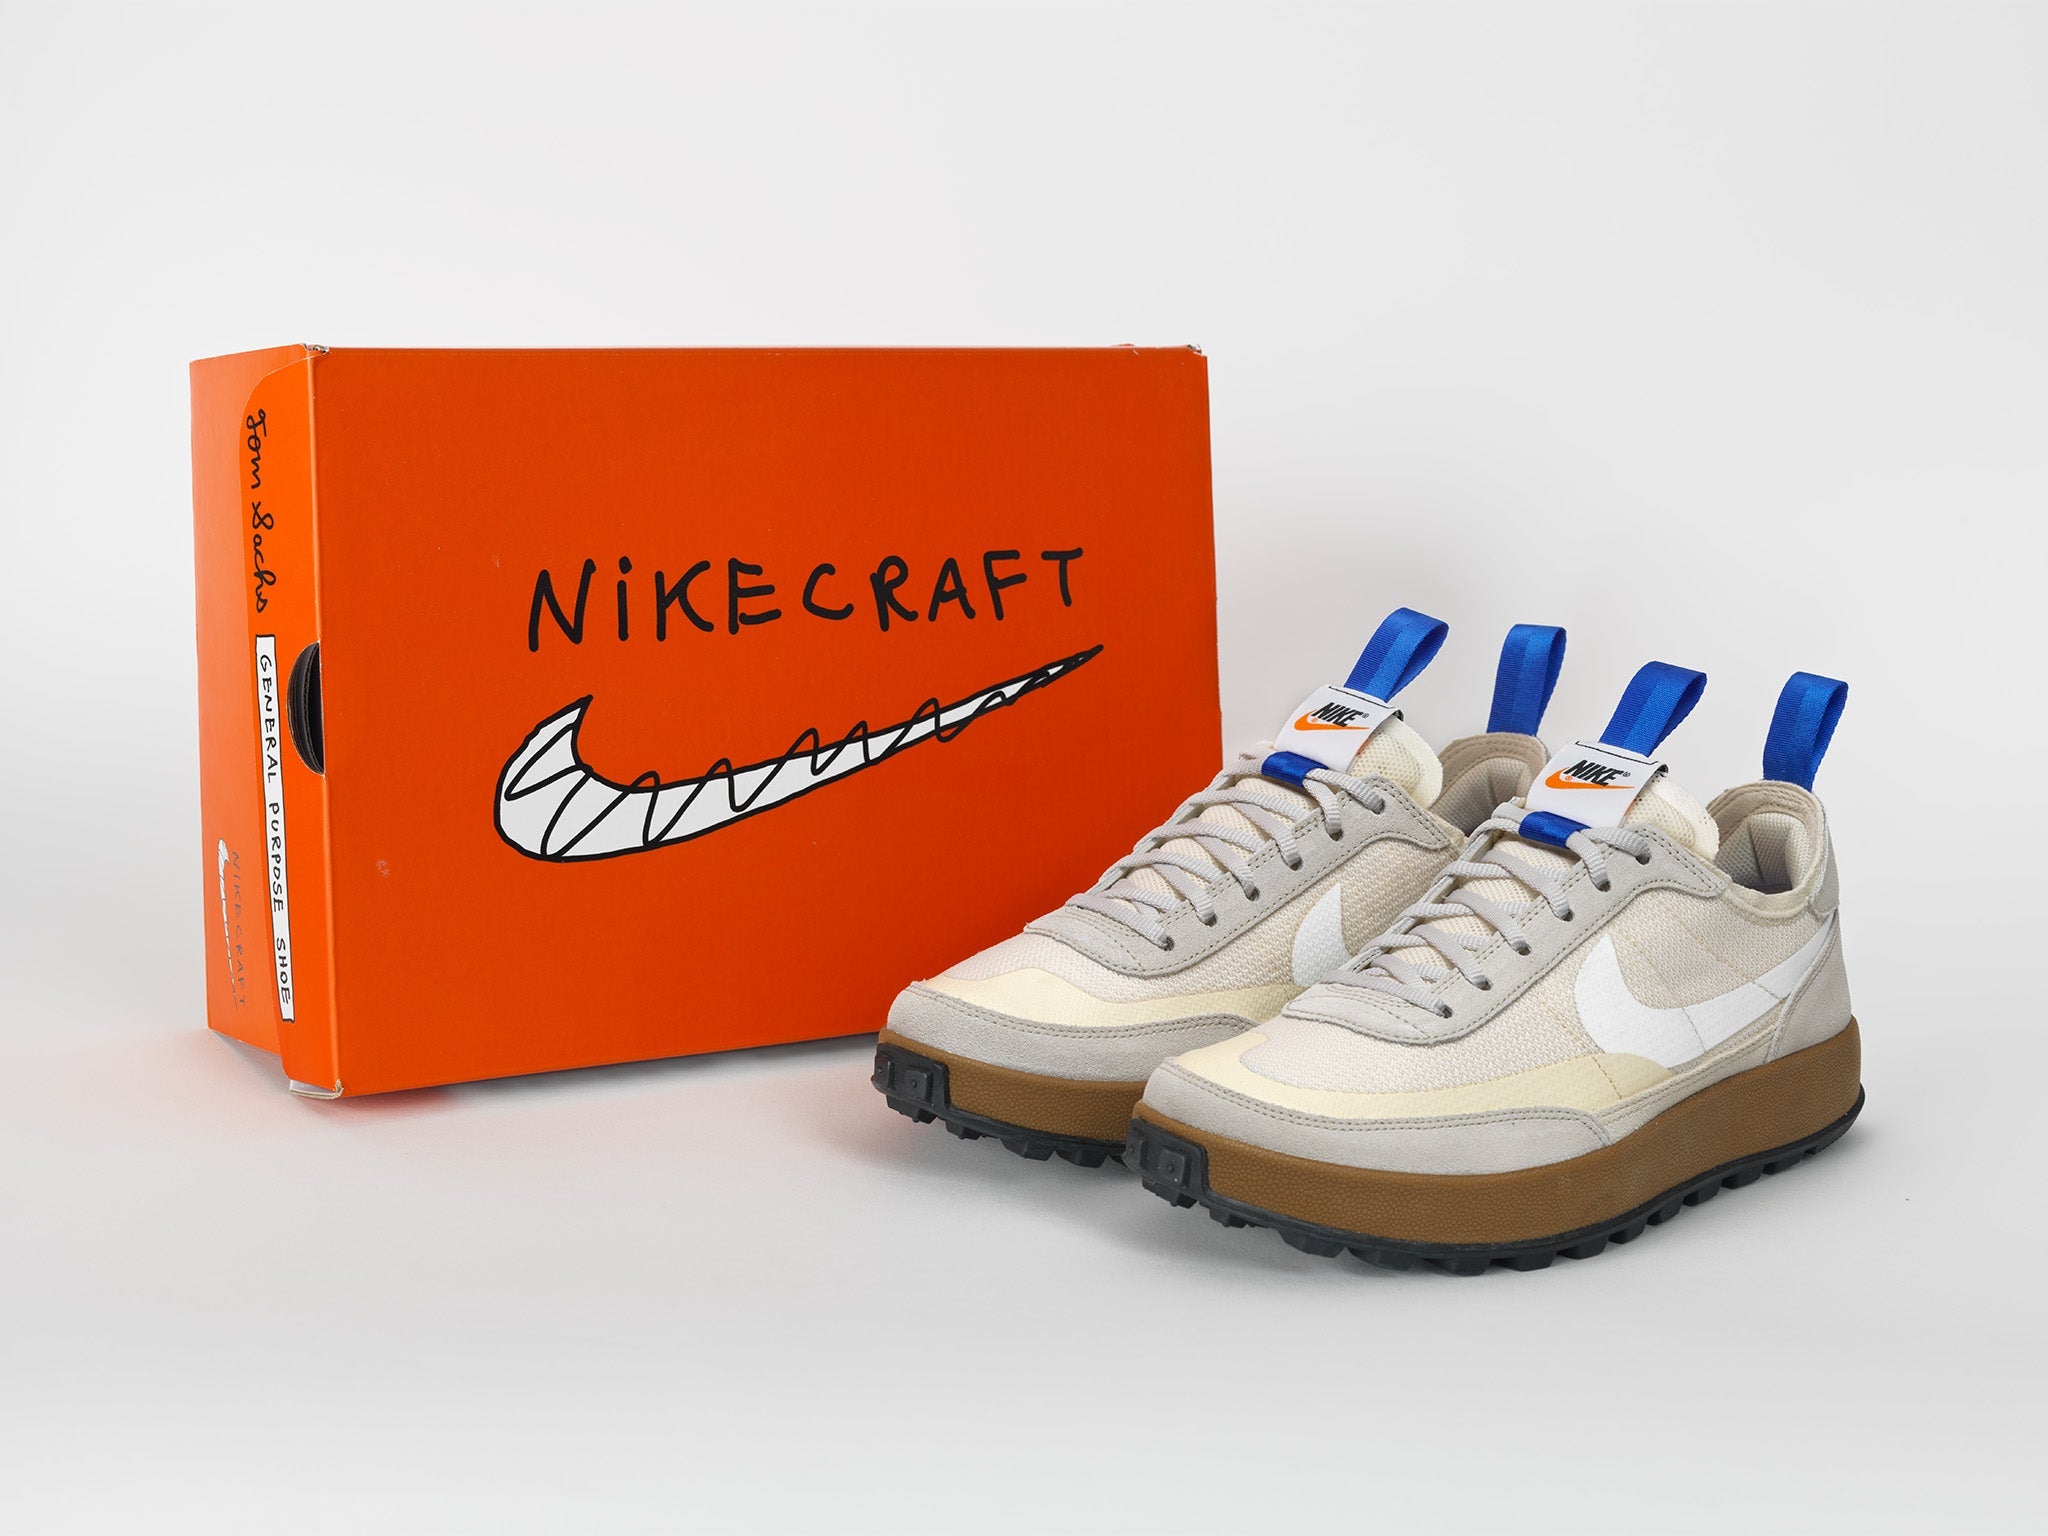 Tom Sachs' NikeCraft General Purpose Shoe is Nike's most wearable shoe ever